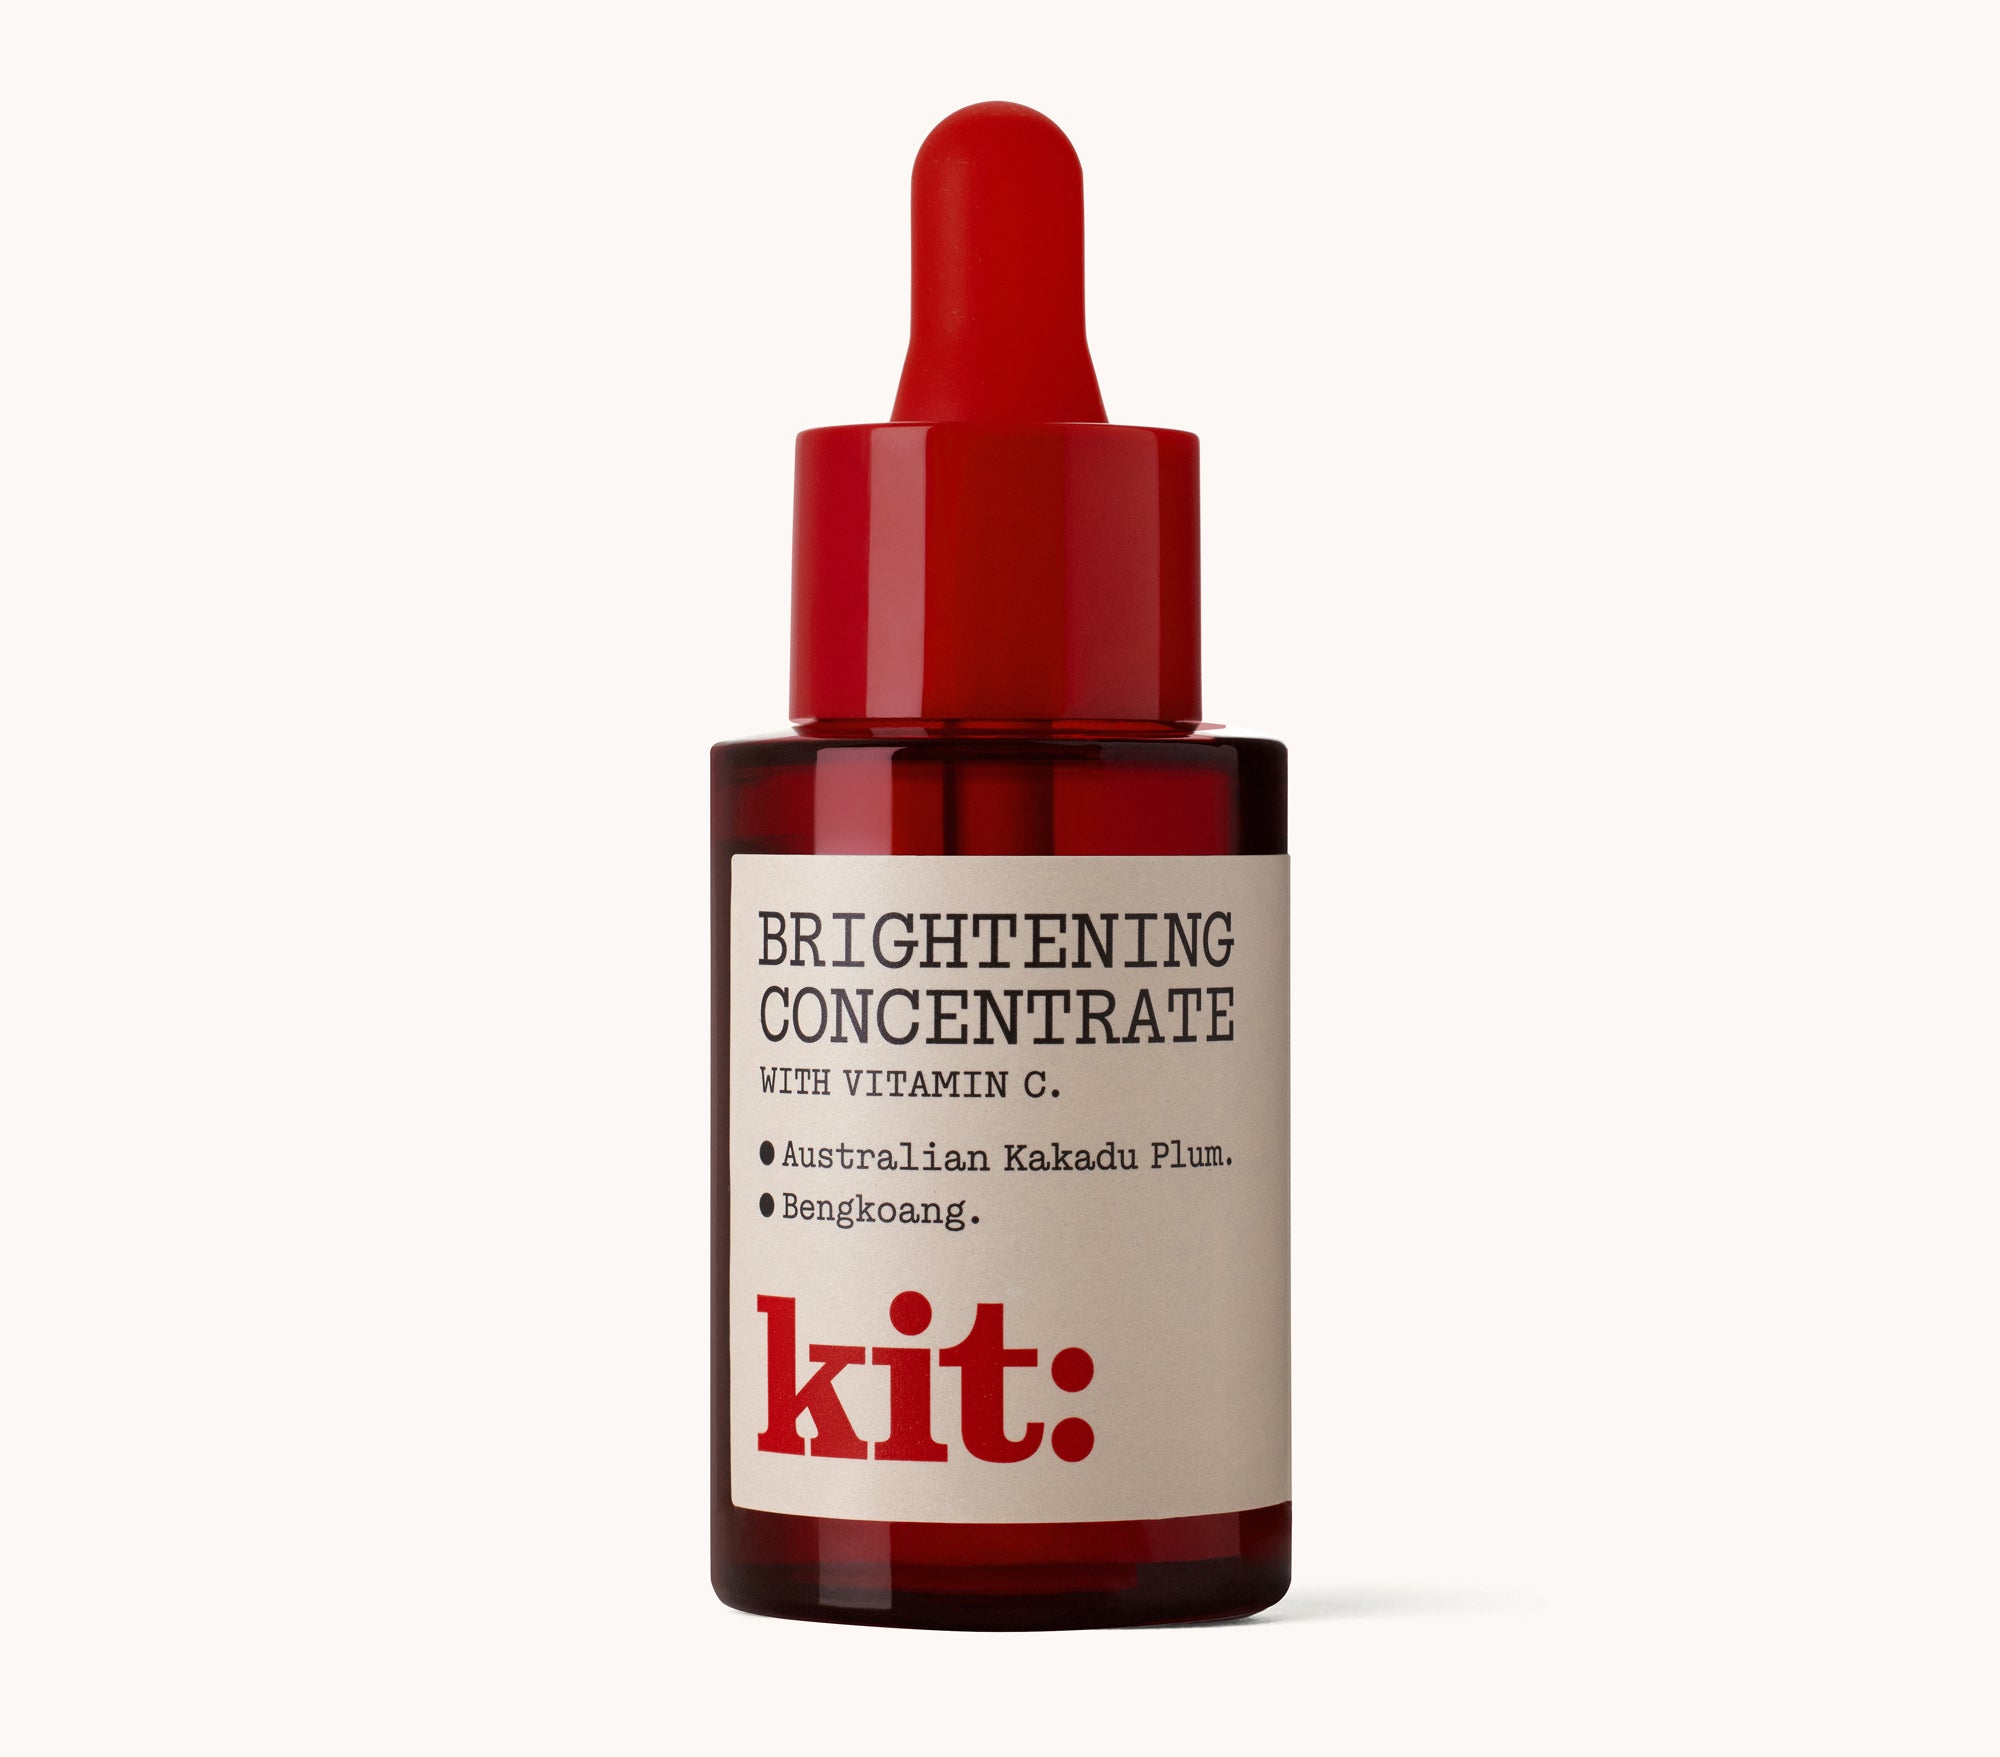 Brightening Concentrate